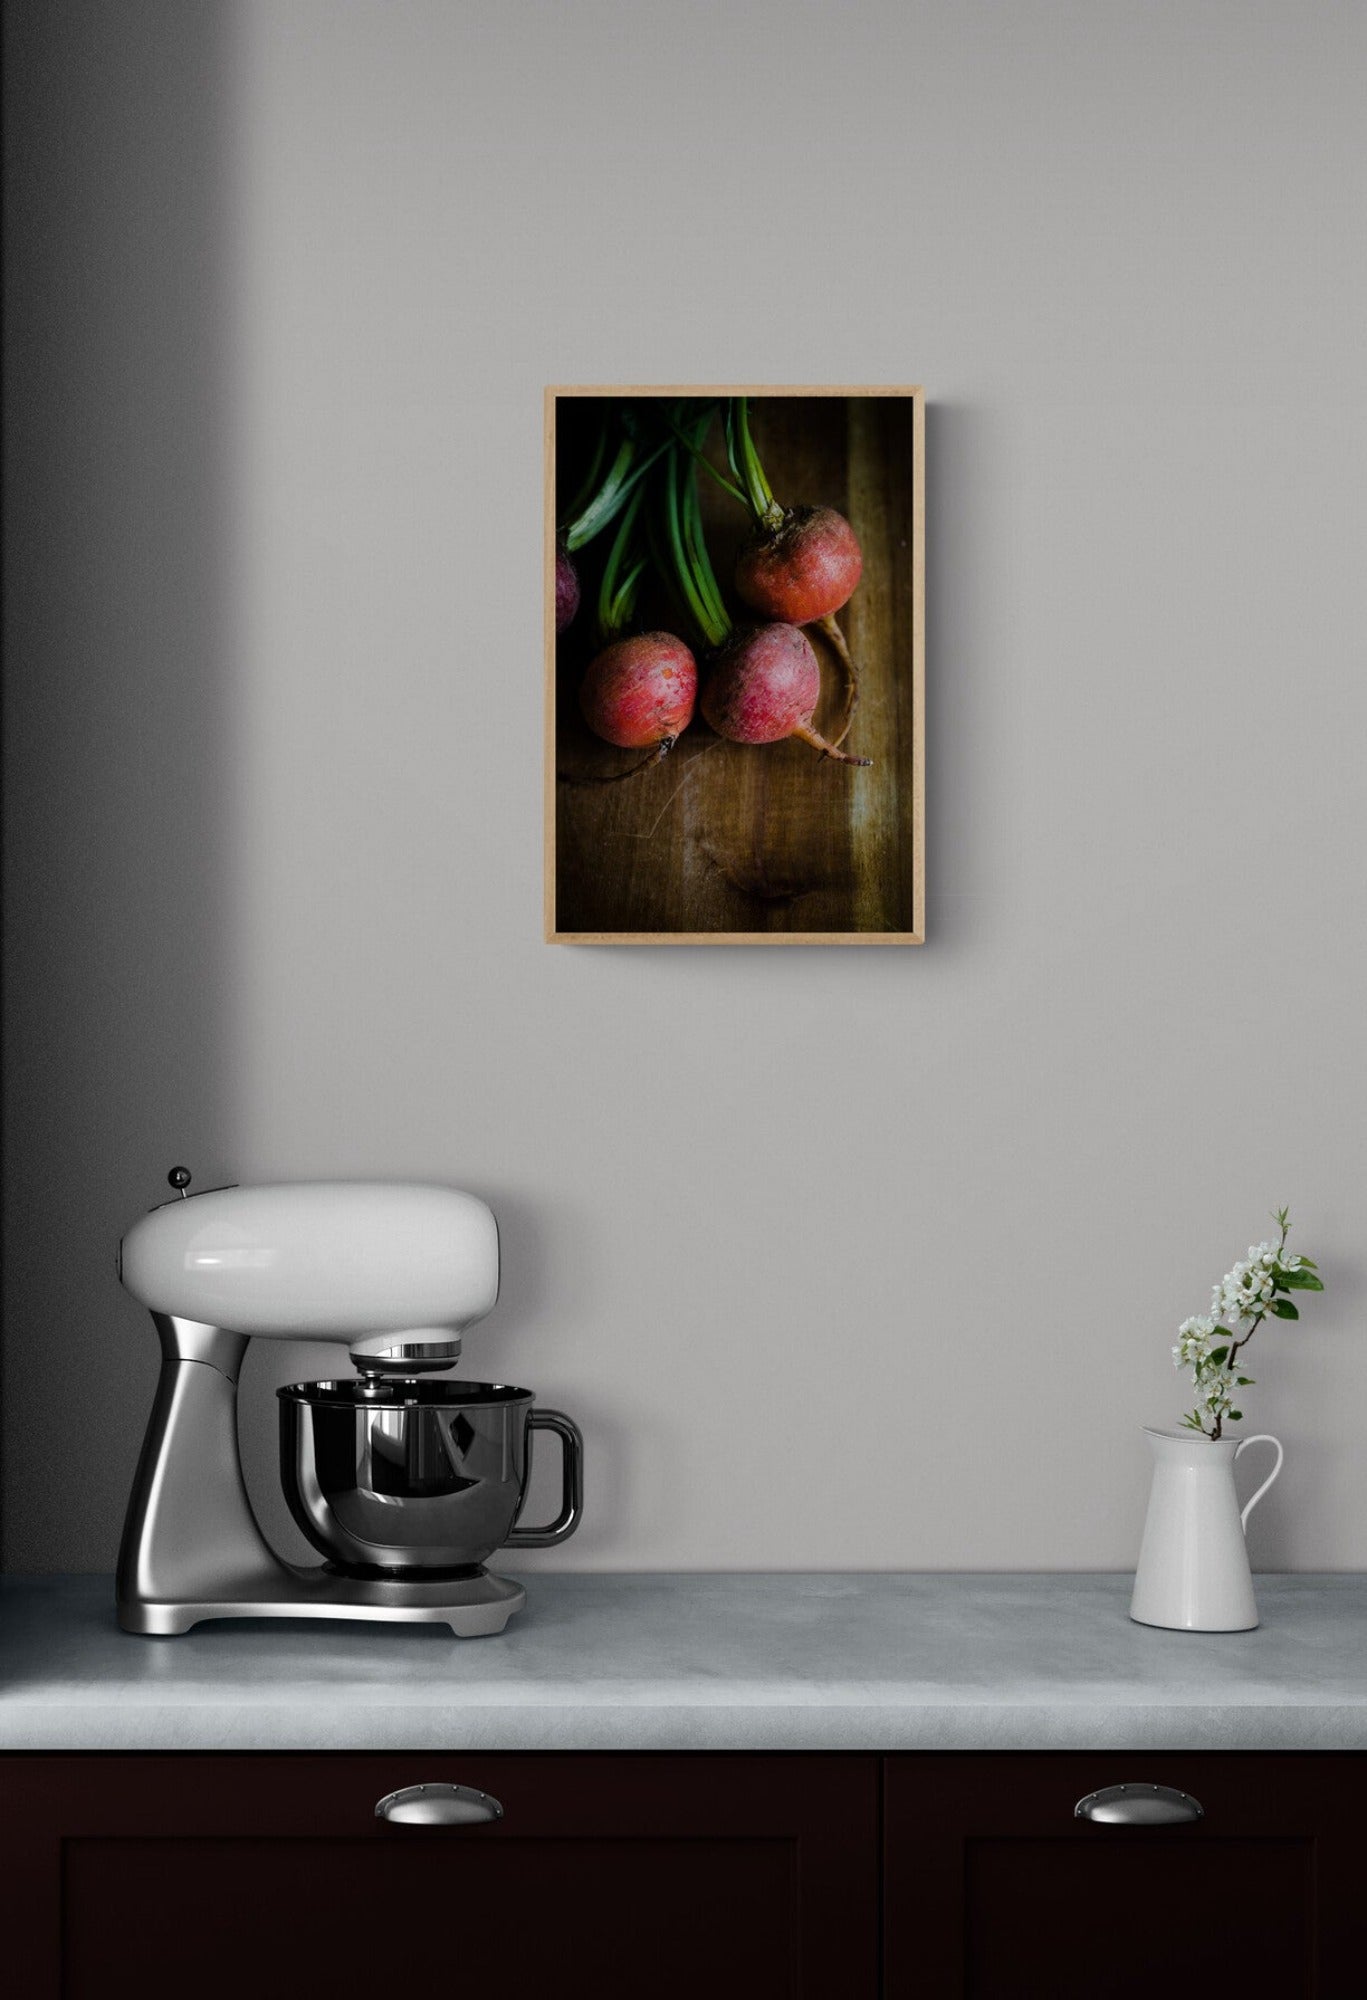 beets photograph print in rustic style in a kitchen as wall art